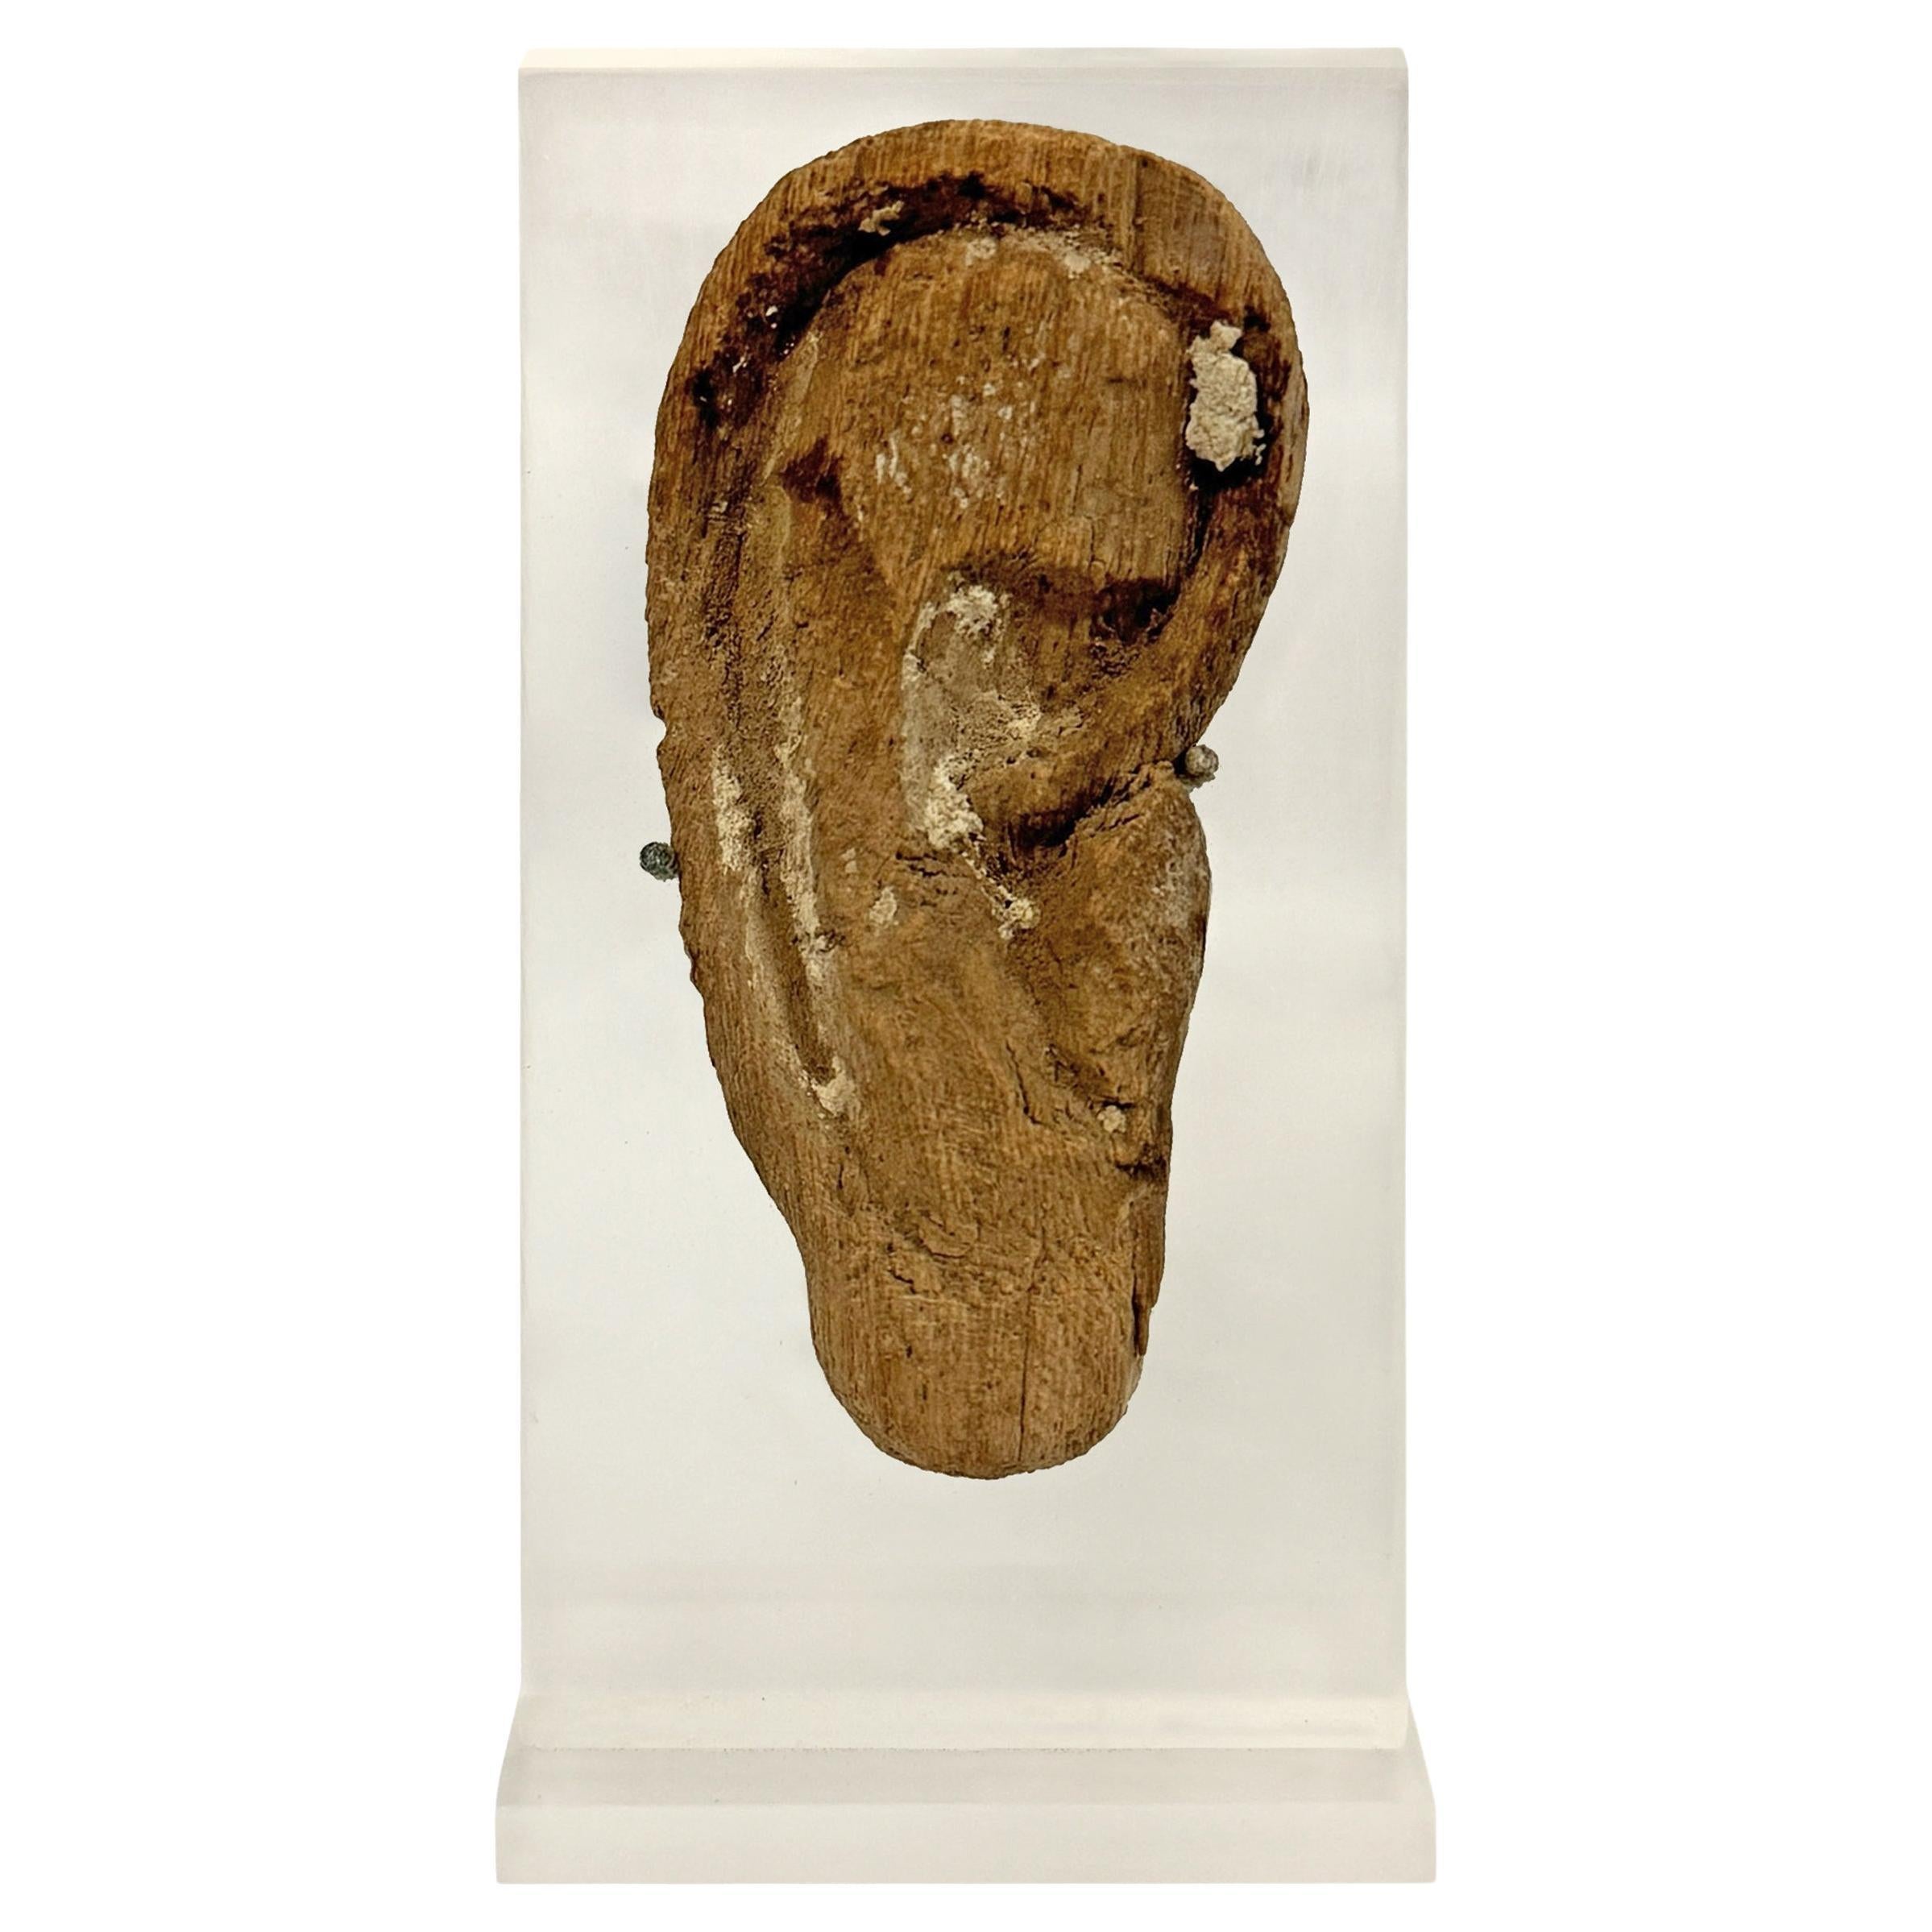 Late-Period to Ptolemaic Period Egyptian Wooden Mummy Mask Ear on Custom Mount